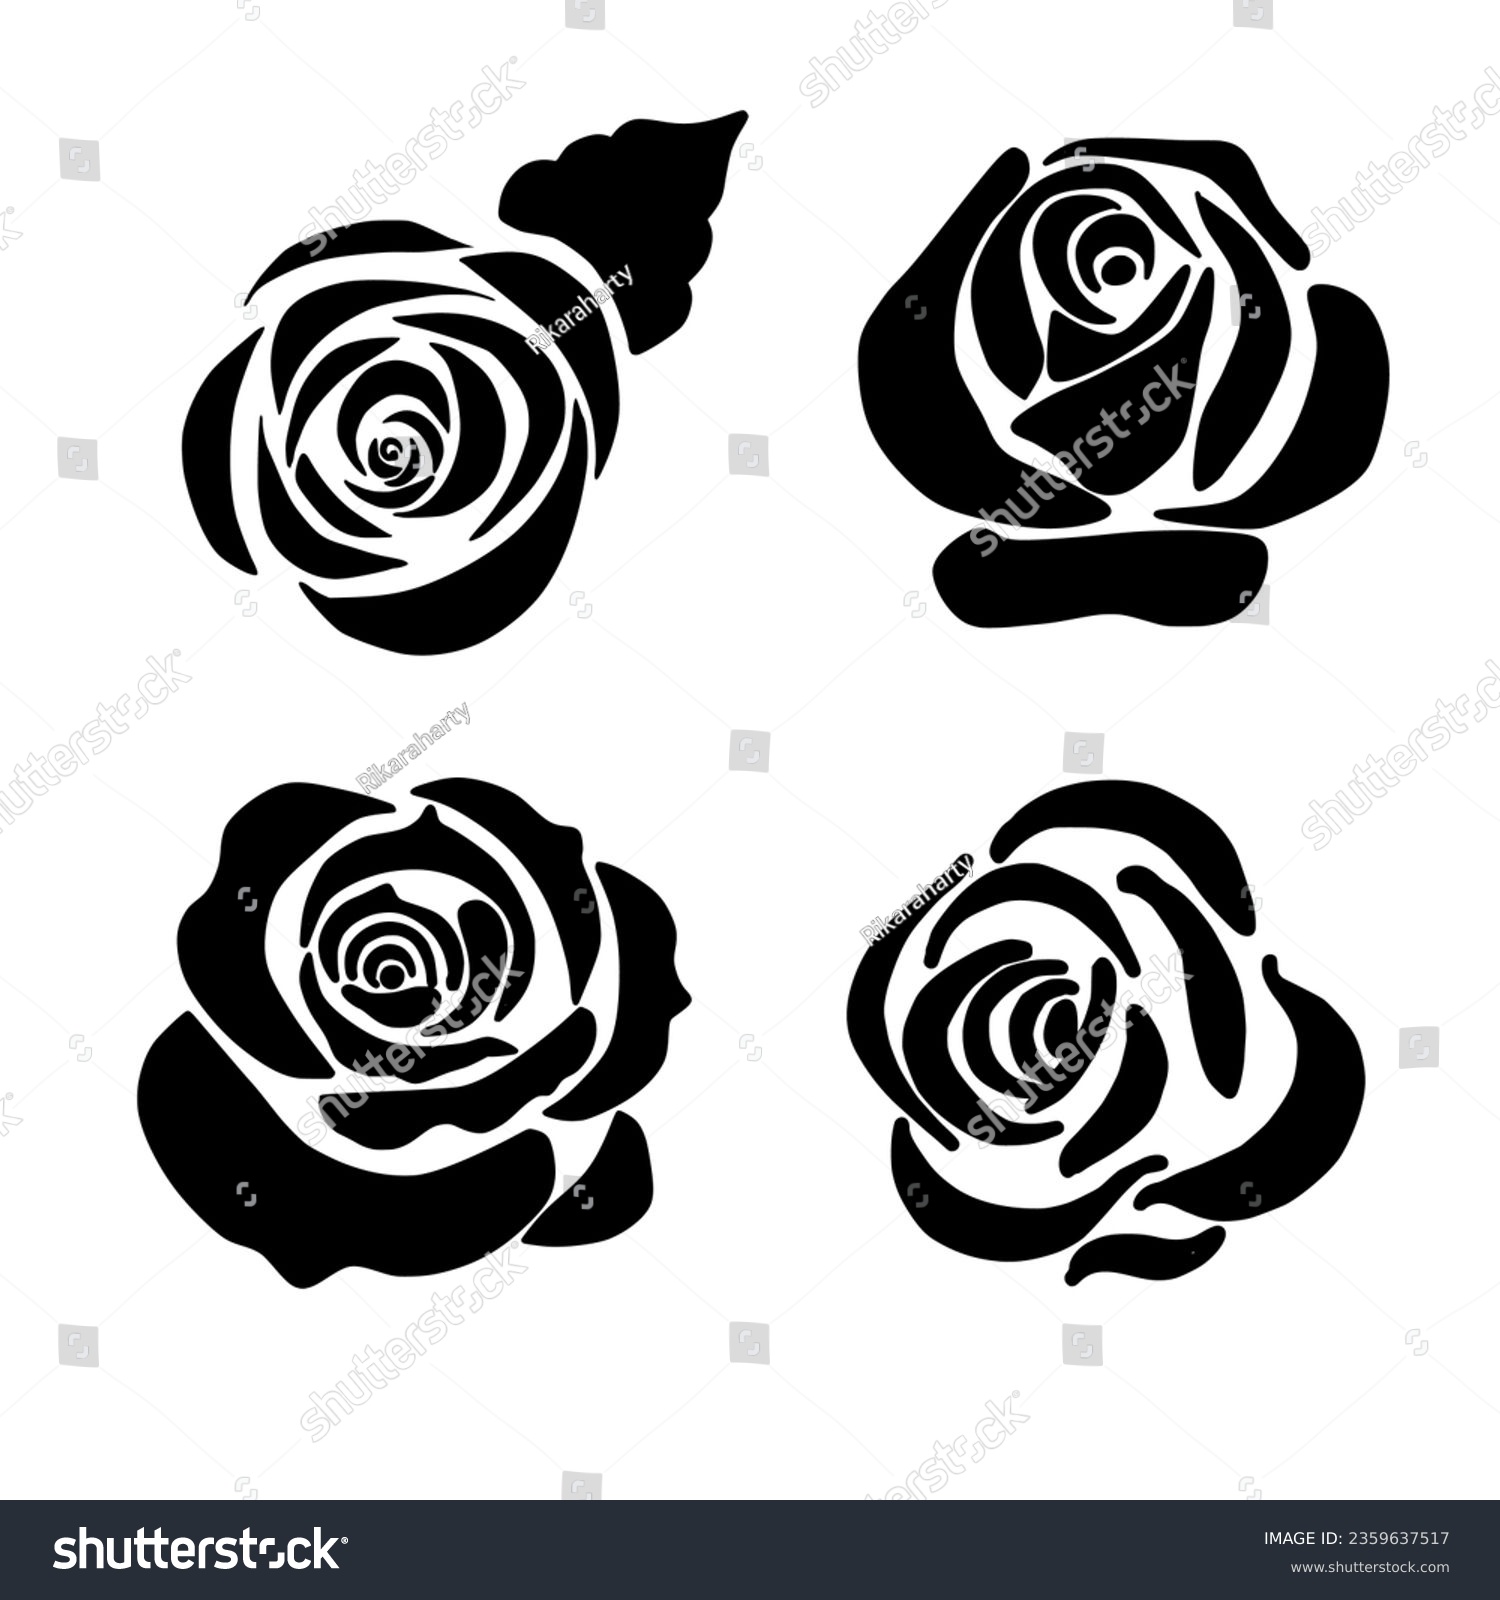 SVG of Black Silhouettes Of Roses Isolated On White Background svg